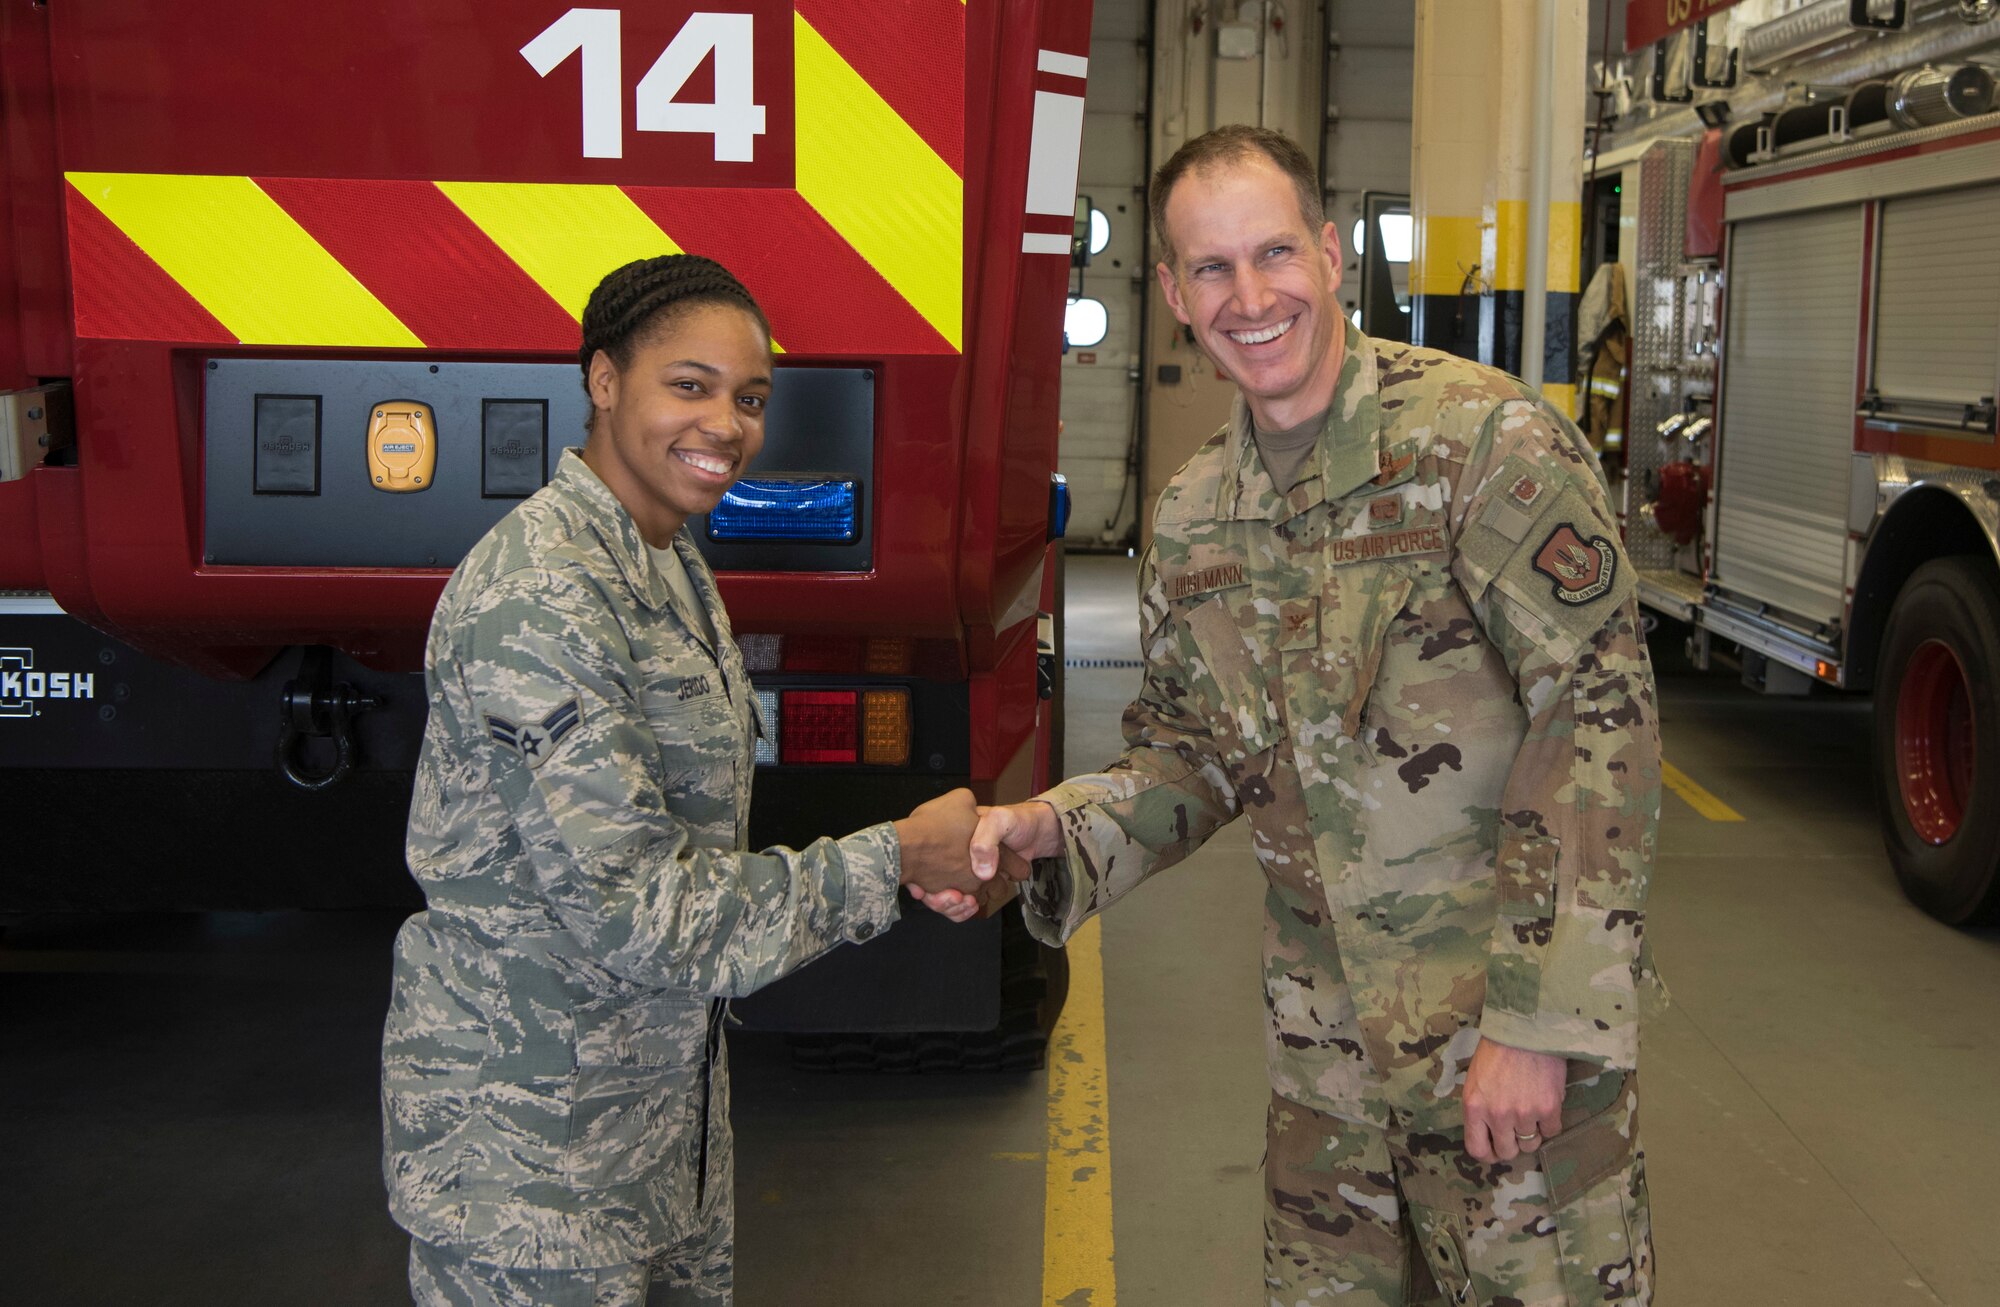 U.S. Air Force Col. Matthew S. Husemann, 86th Airlift Wing vice commander, poses for a photo with Airman 1st Class Kayla T. Jerido, 86th Civil Engineer Squadron fire protection journeyman, to recognize her as the Airlifter of the Week at Ramstein Air Base, Germany, Oct. 18, 2019. Jerido received the award after displaying strong leadership in several different roles within the fire-station. Perhaps most notably was Jerido’s ability to lead a fire station immersion tour for the 20 NATO partner firefighters from Lithuania Romania and Ukraine. (U.S. Air Force photo by Senior Airman Kristof J. Rixmann)